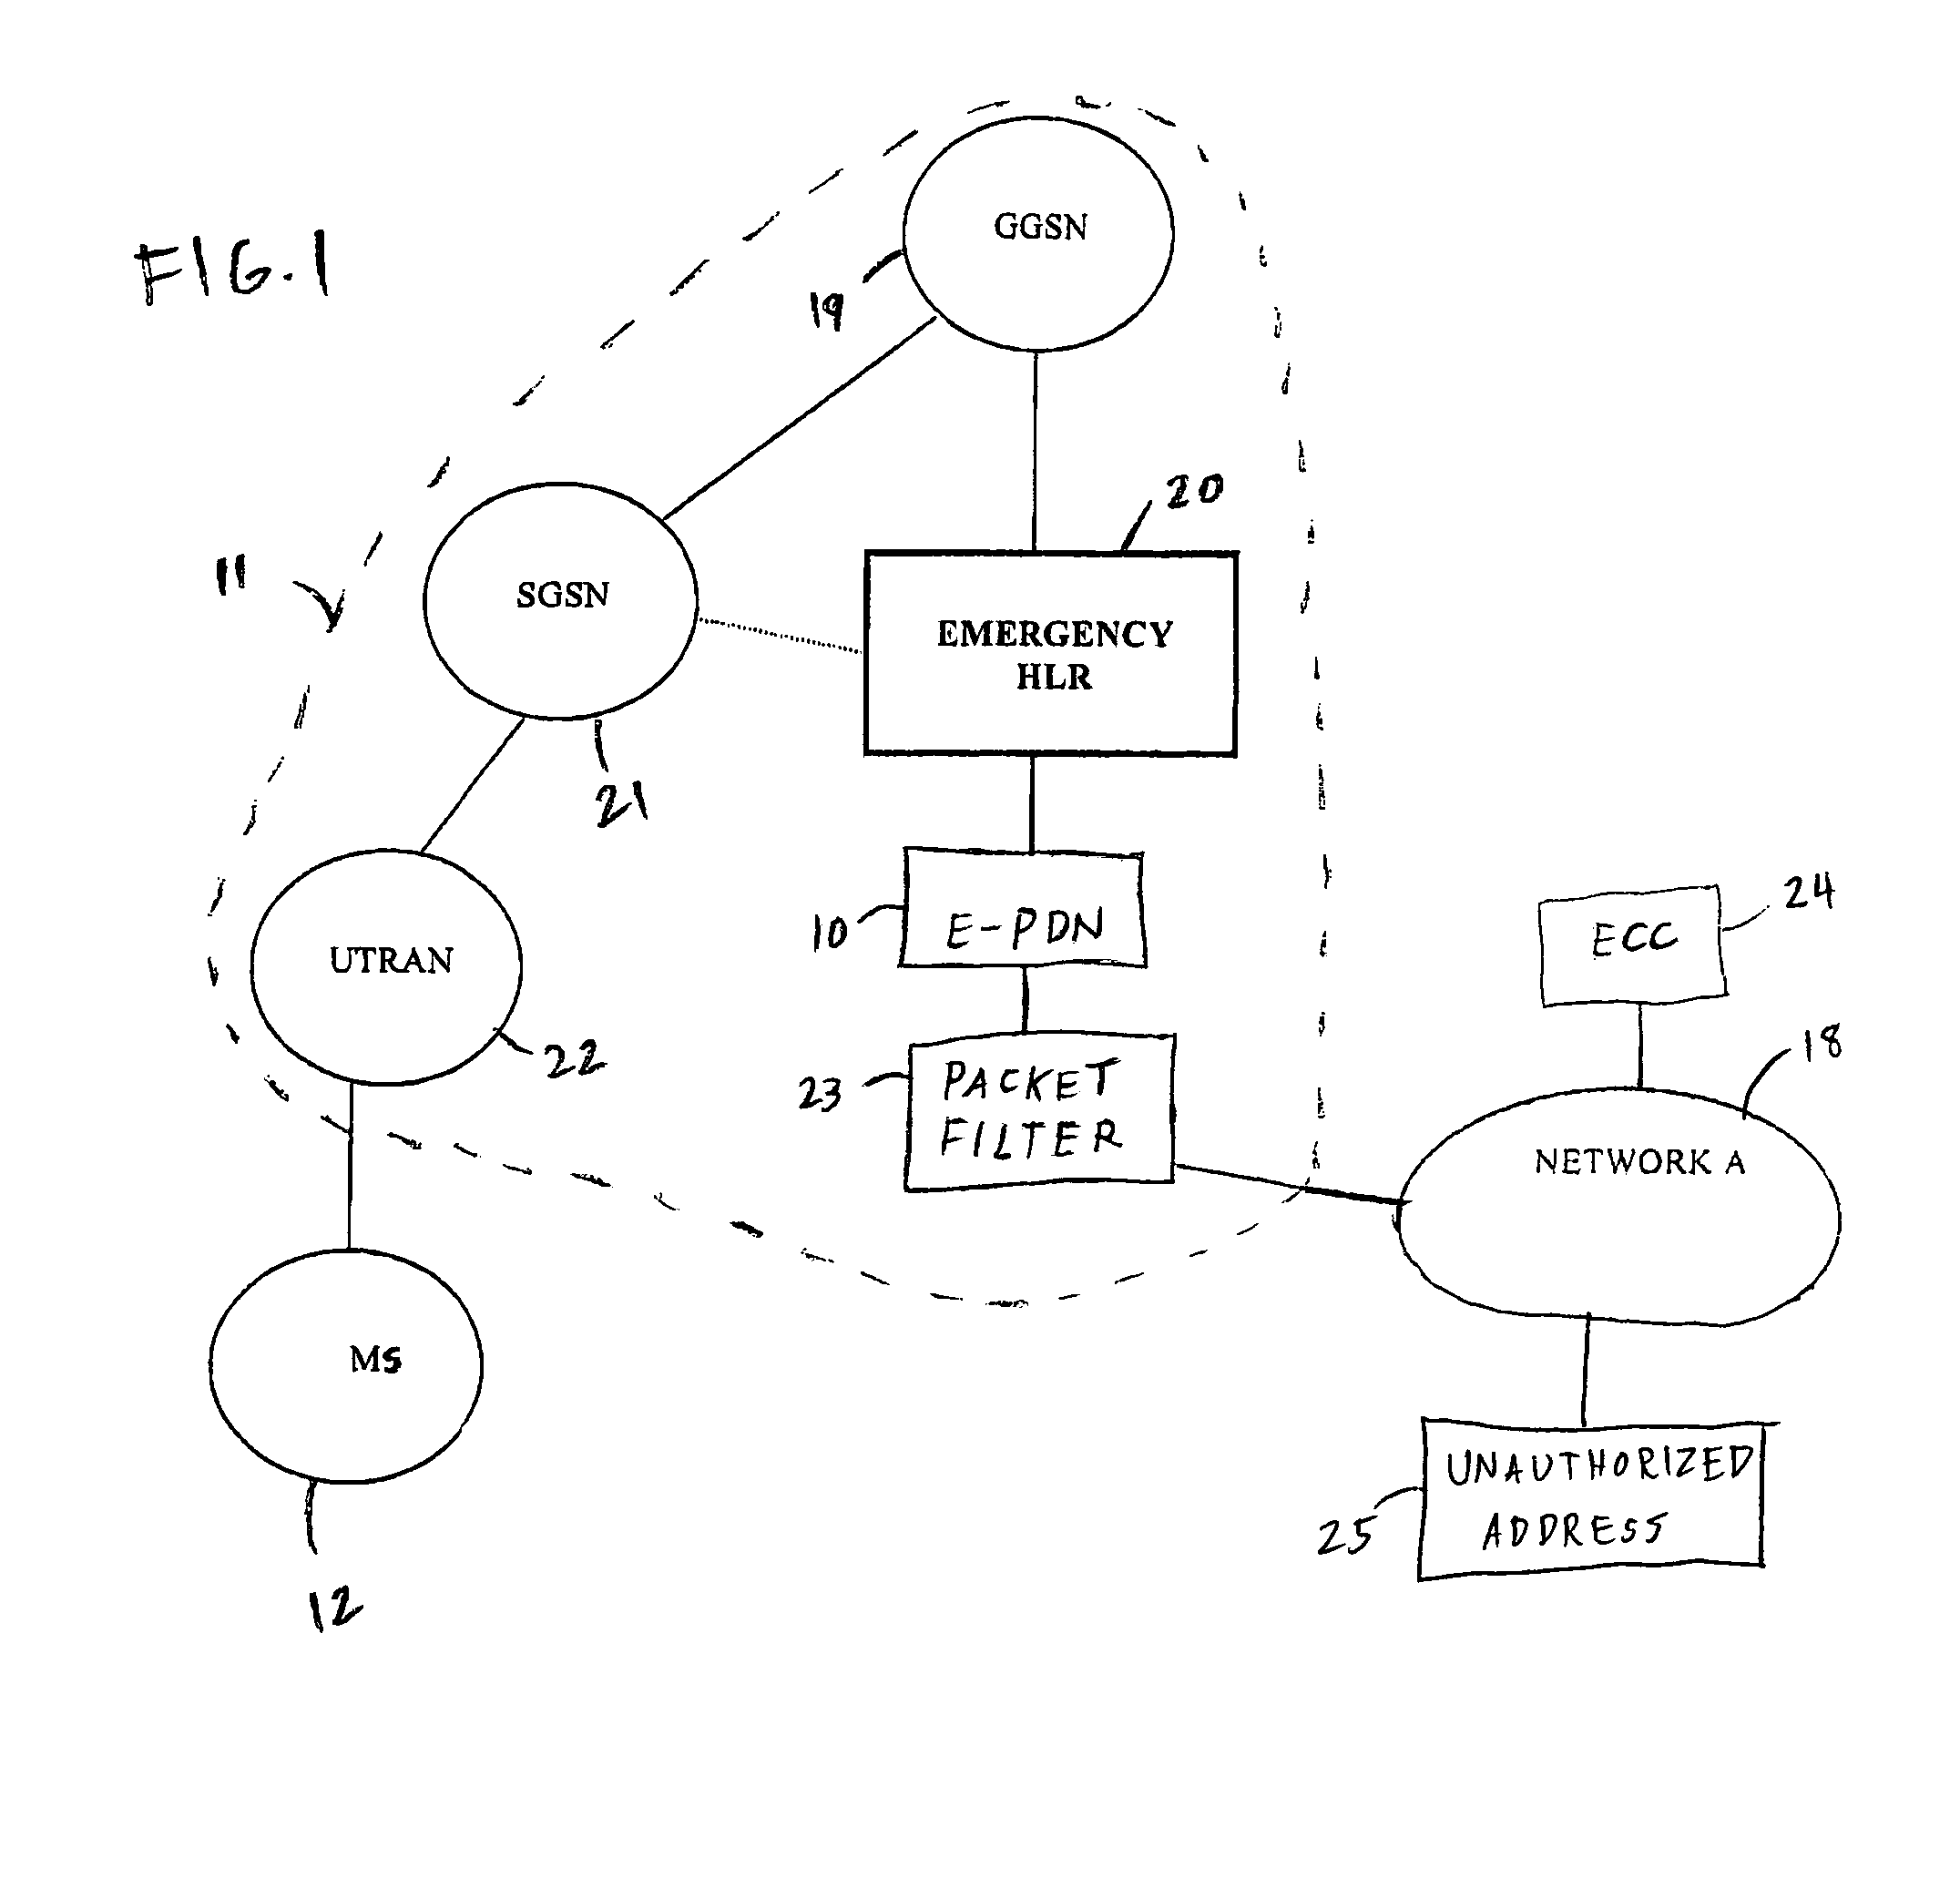 Packet filtering for emergency service access in a packet data network communication system